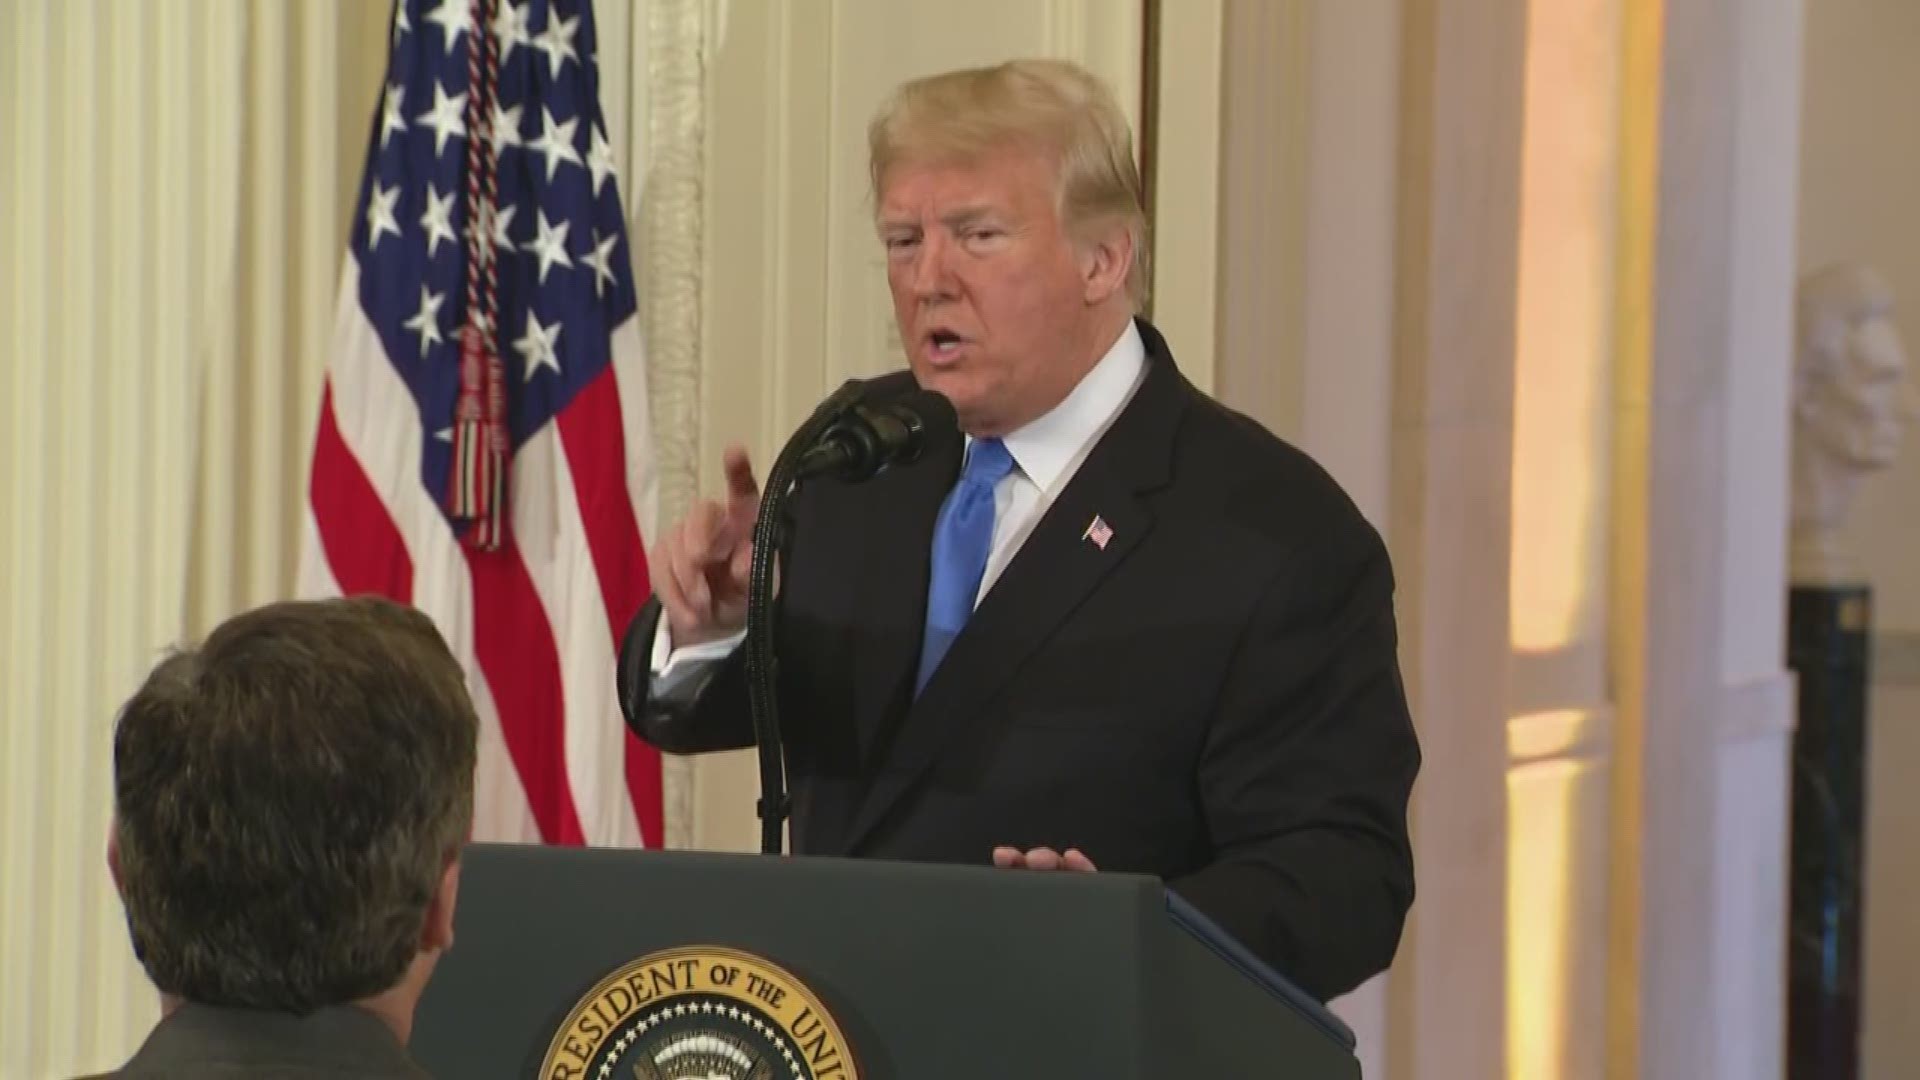 President Donald Trump and CNN reporter Jim Acosta had a confrontational exchange during a White House press conference on Wednesday